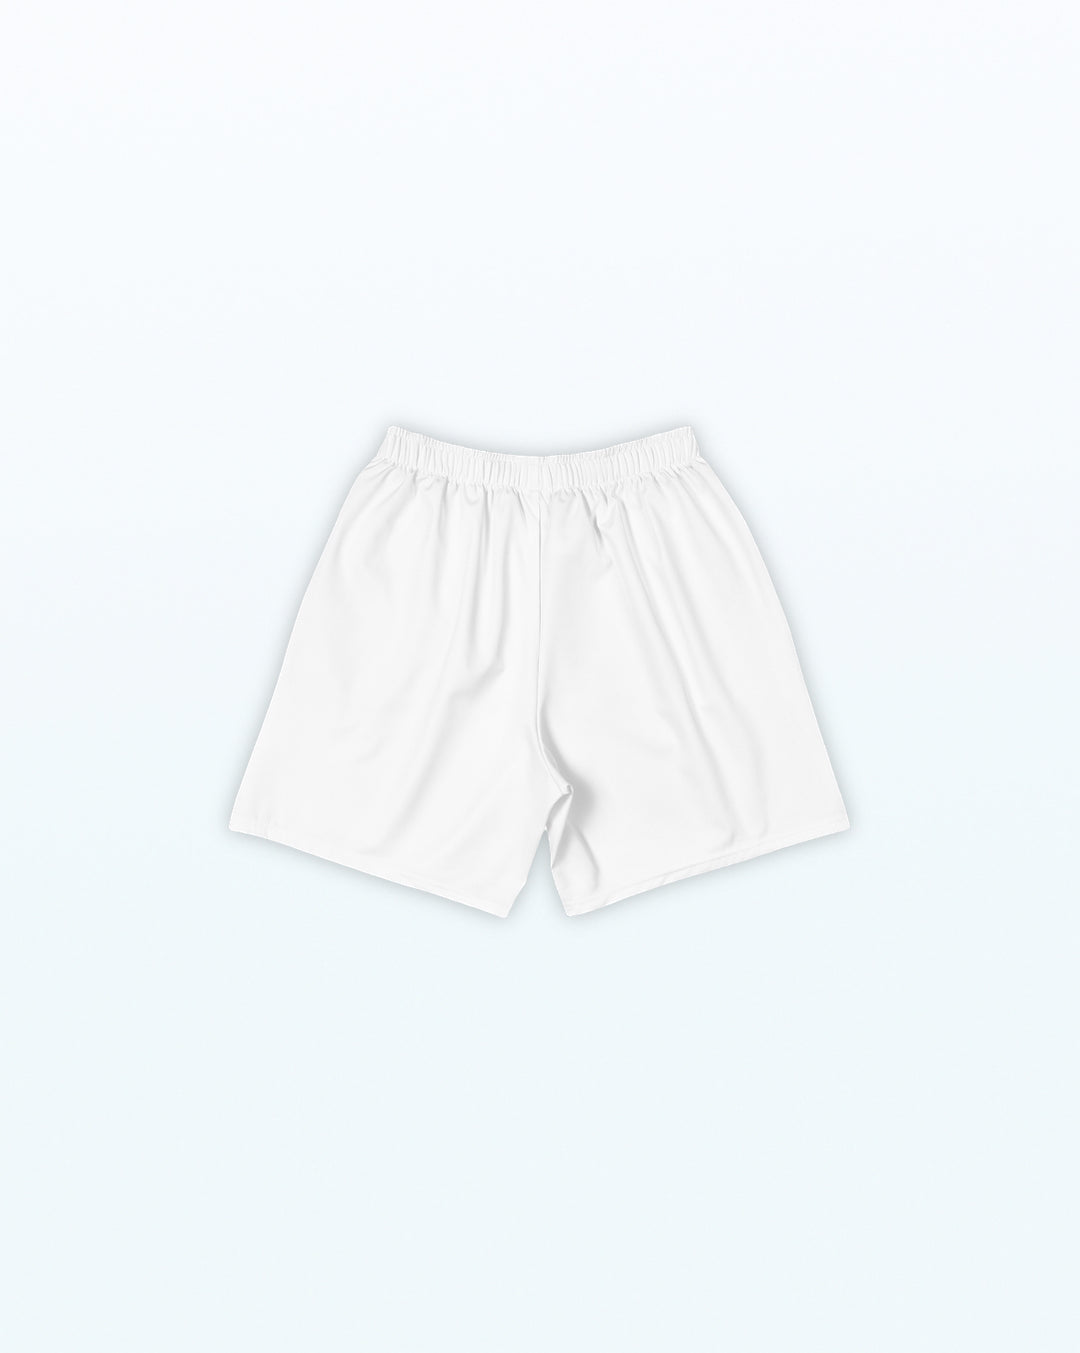 casual gym shorts white men gym wear athleisure #color_white